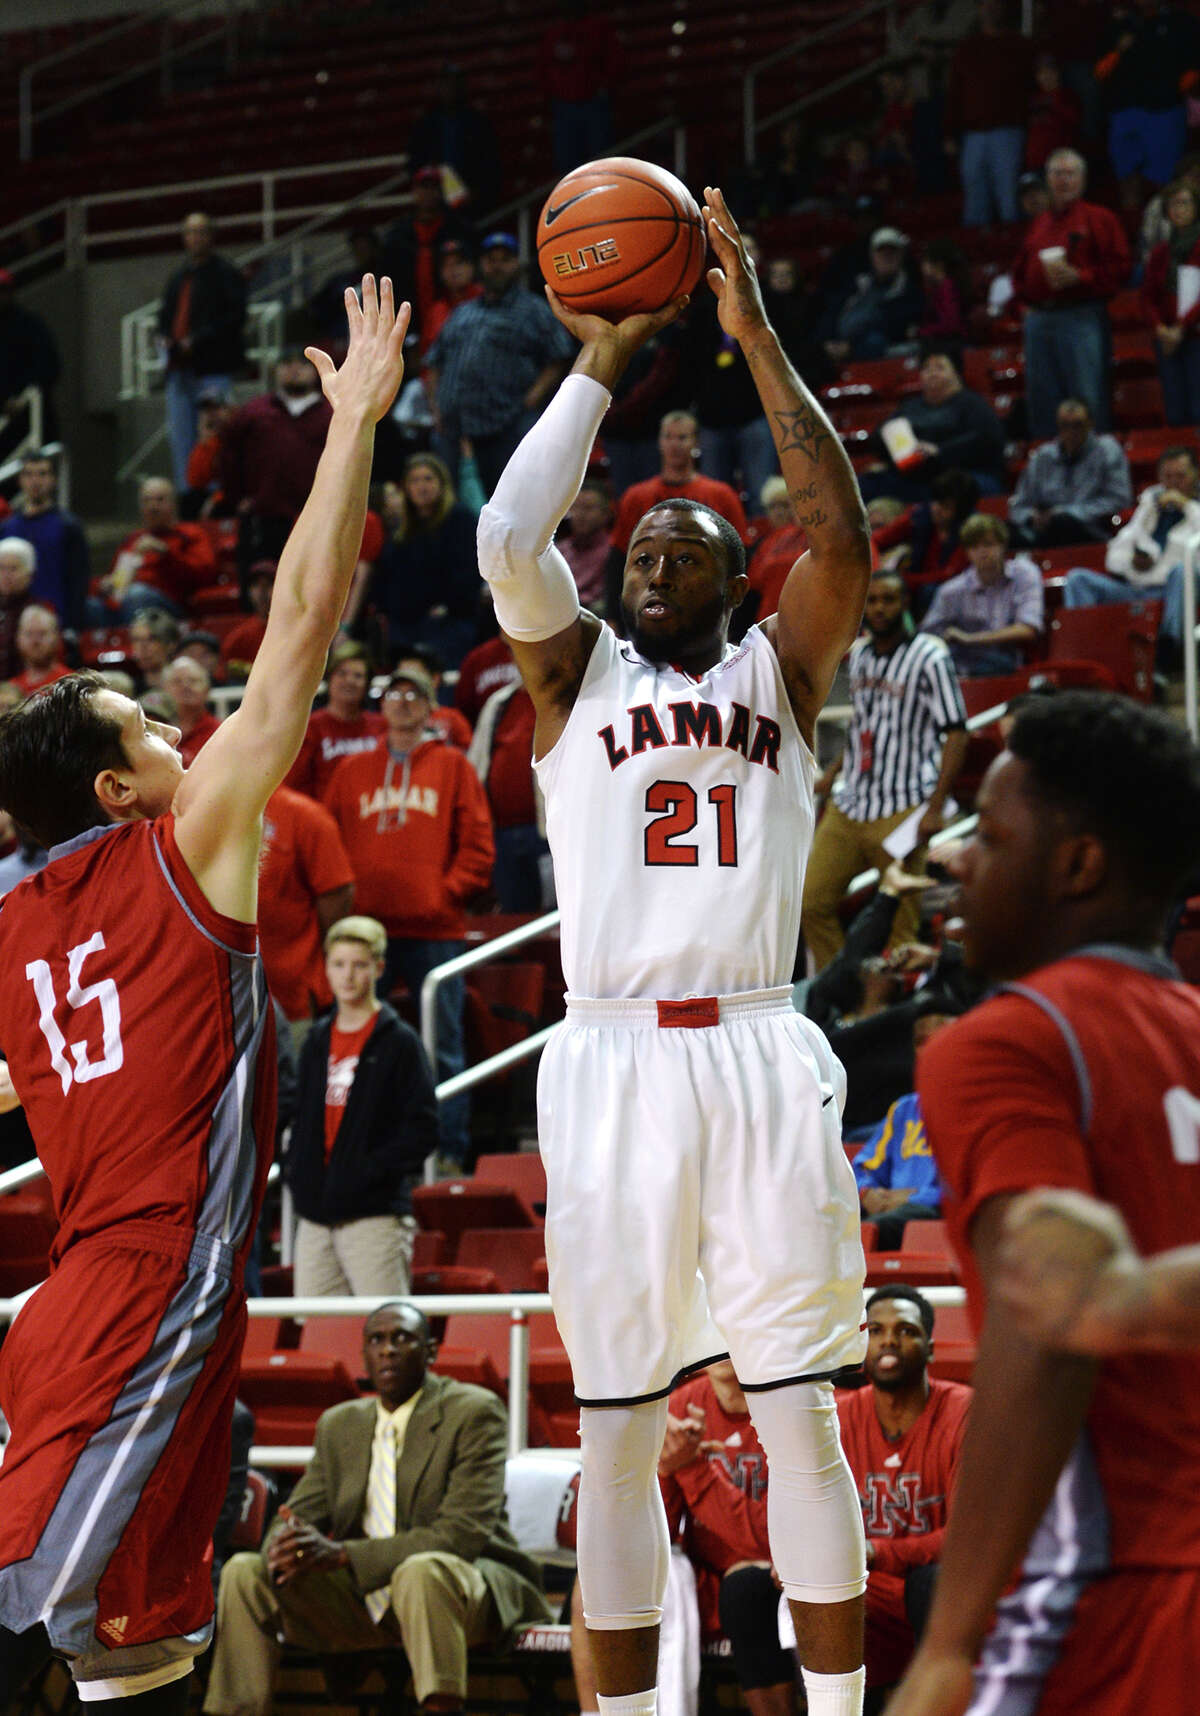 Lamar's Donovan Ross, No. 21, goes up for a shot during Saturday night's game against the Colonels. The Lamar Cardinals hosted the Nicholls Colonels at the Montagne Center on Saturday. Photo taken Saturday 1/3/15 Jake Daniels/The Enterprise